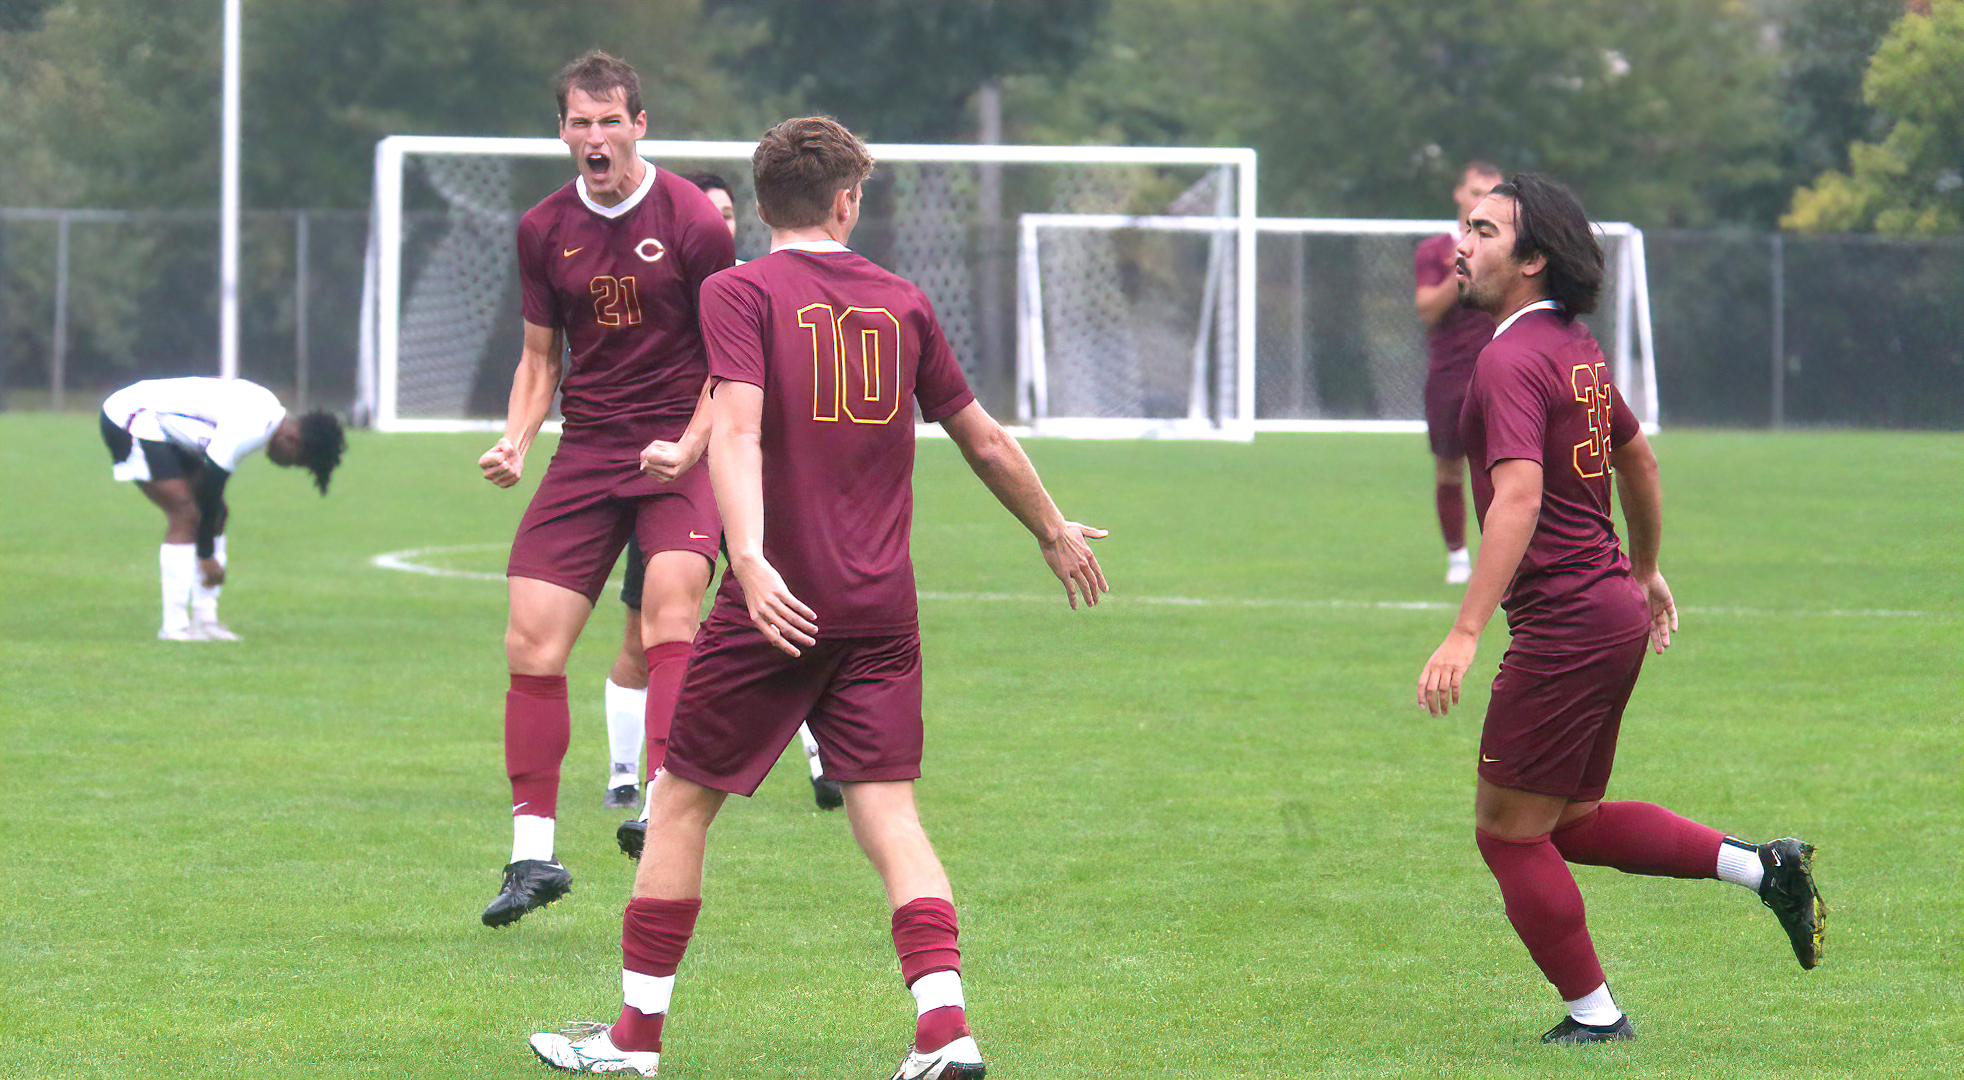 The Cobbers celebrate the goal from Gannon Brooks (#10) in the first half at Hamline. (Photo courtesy of Ryan Coleman - D3photography)